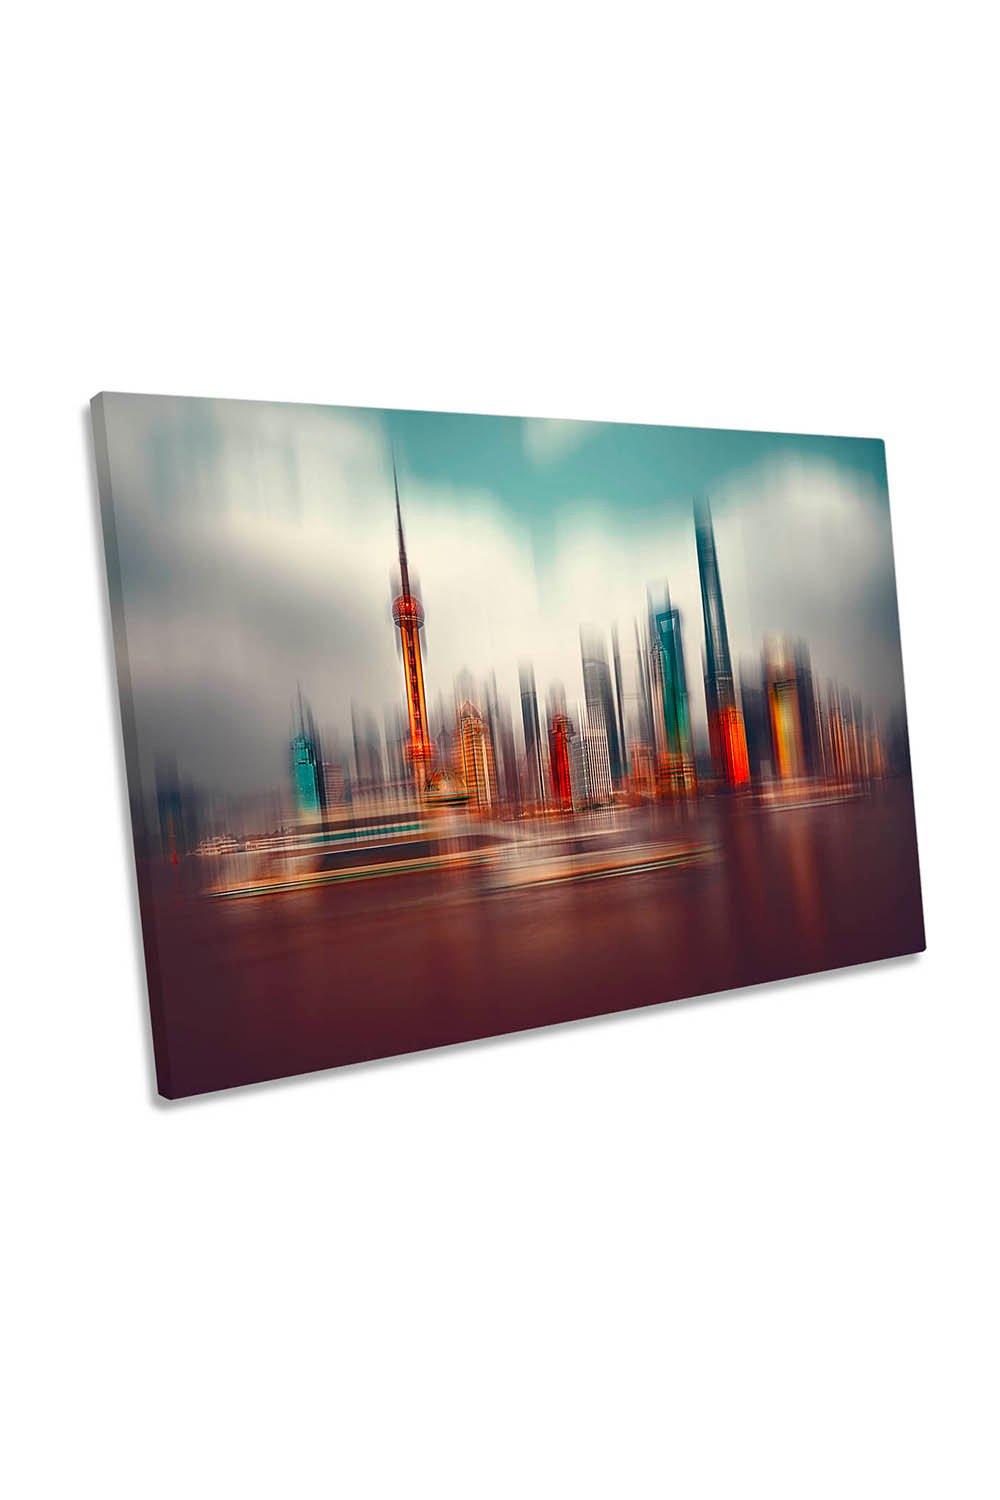 Colours of Shanghai China Abstract Canvas Wall Art Picture Print